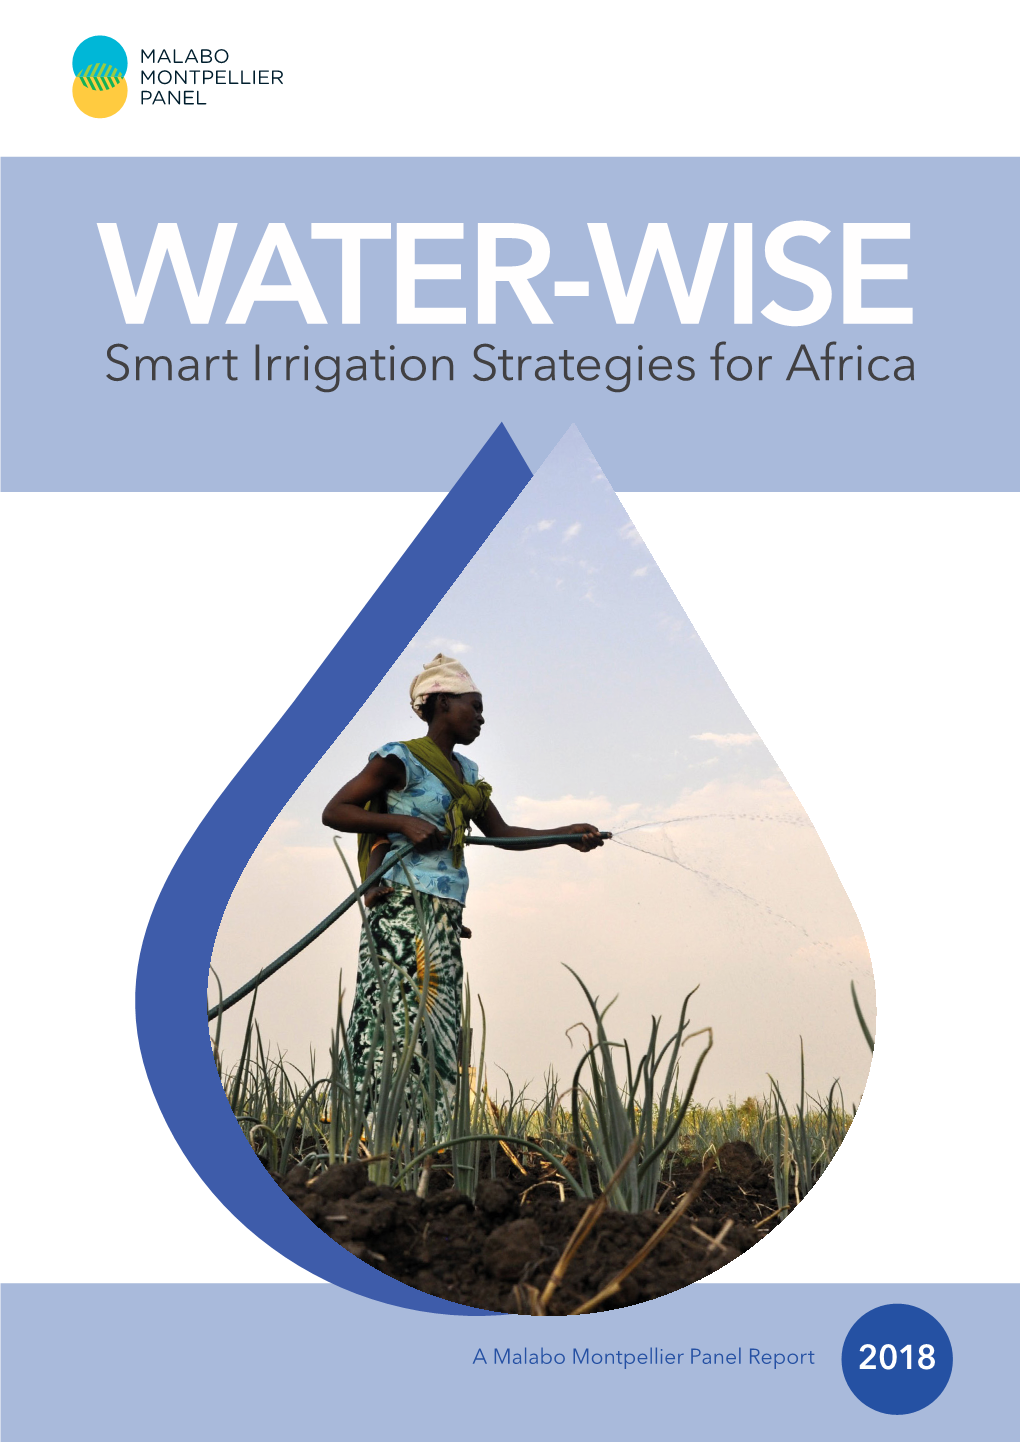 Report: WATER-WISE – Smart Irrigation Strategies for Africa